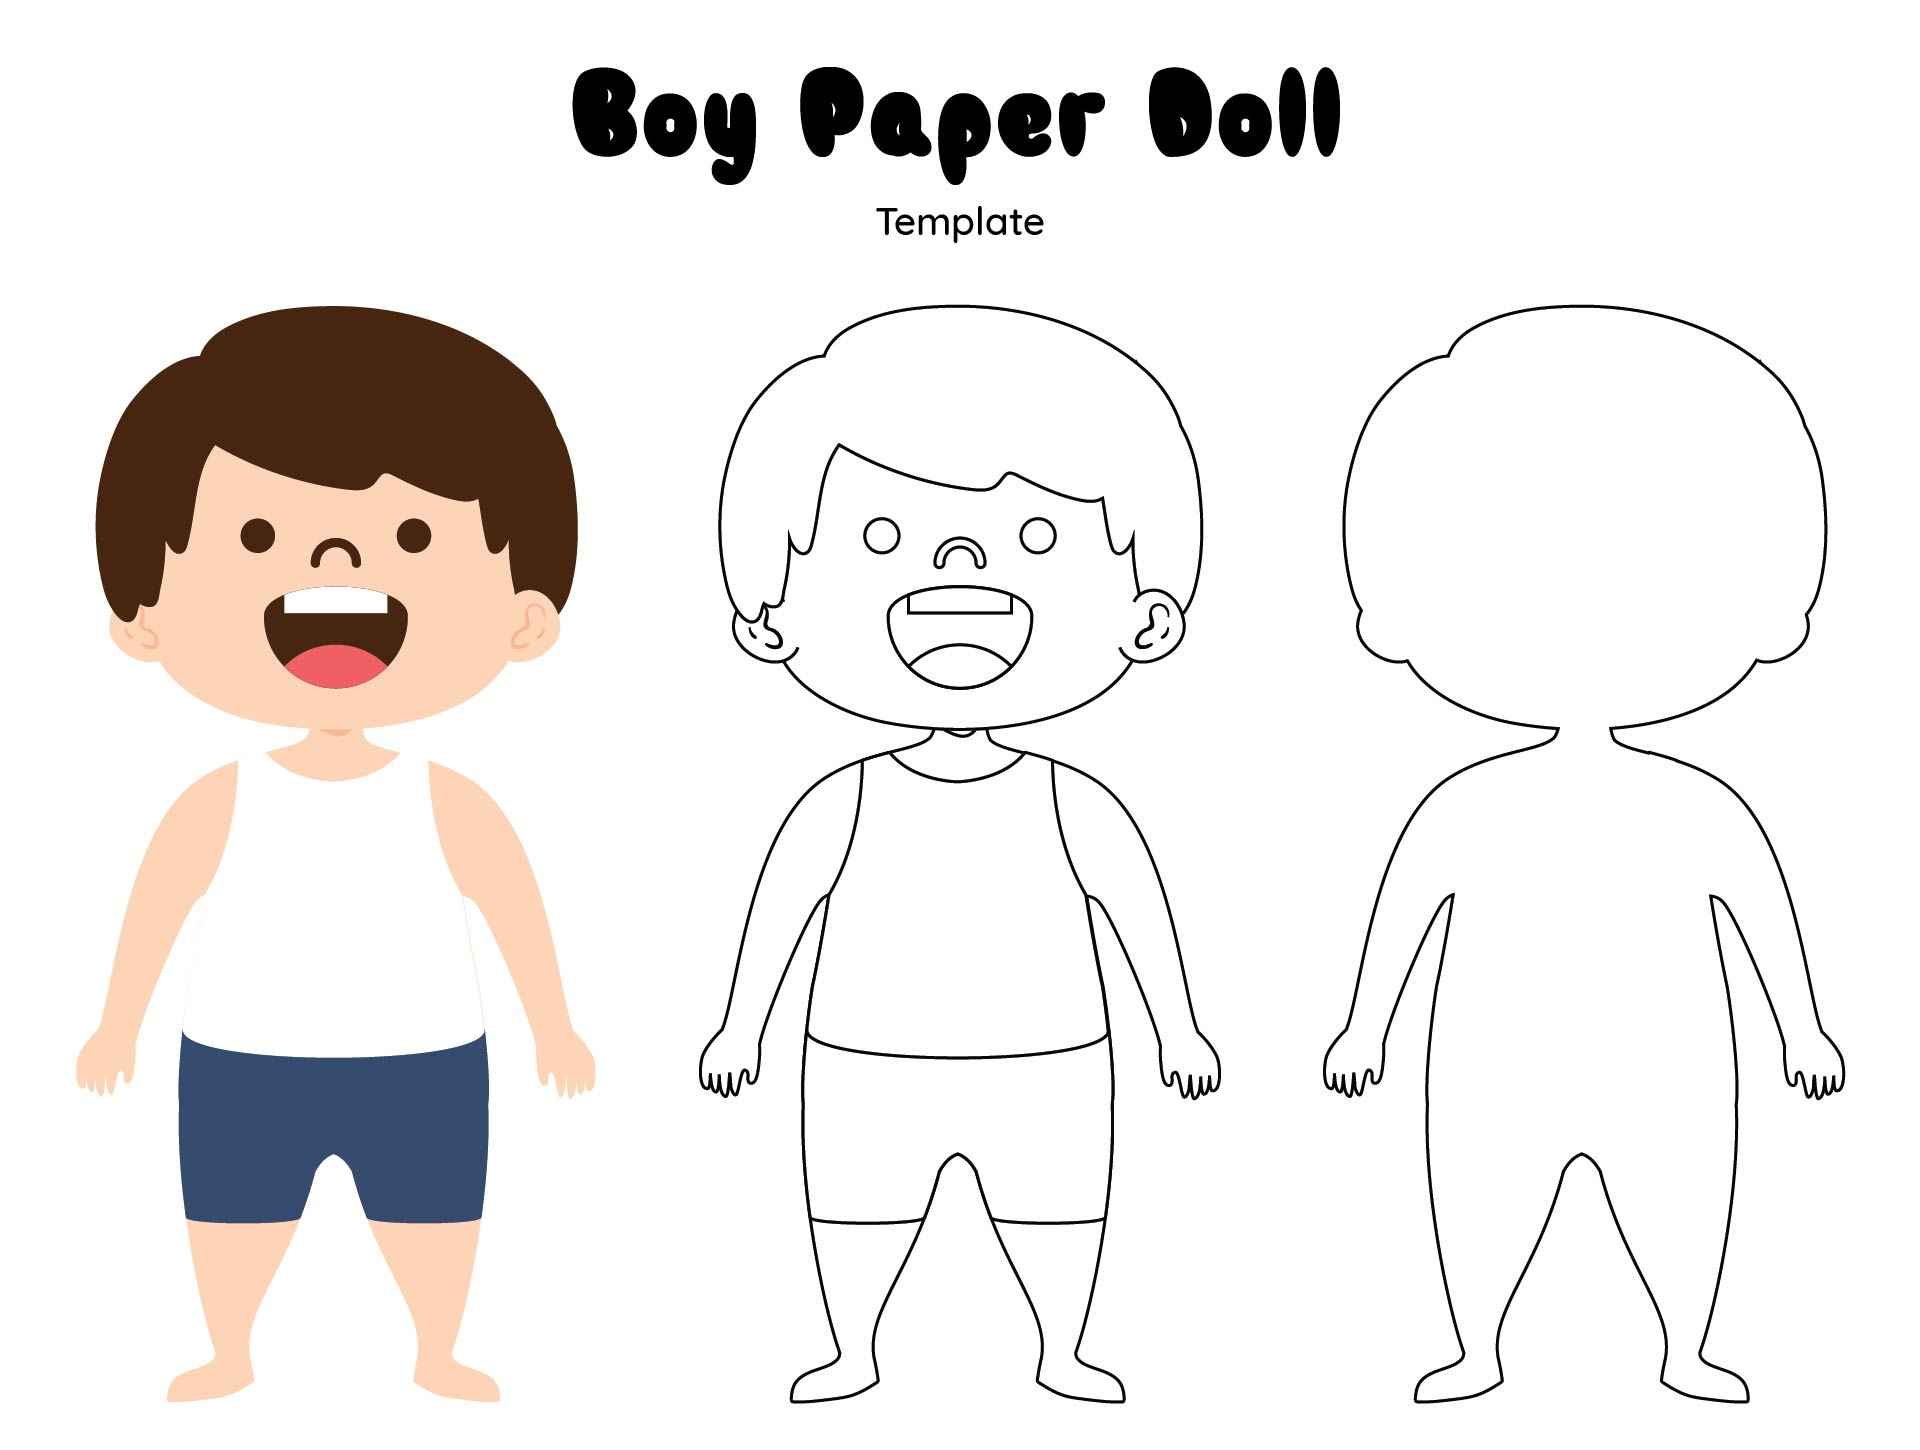 Boys Paper Doll Body Template